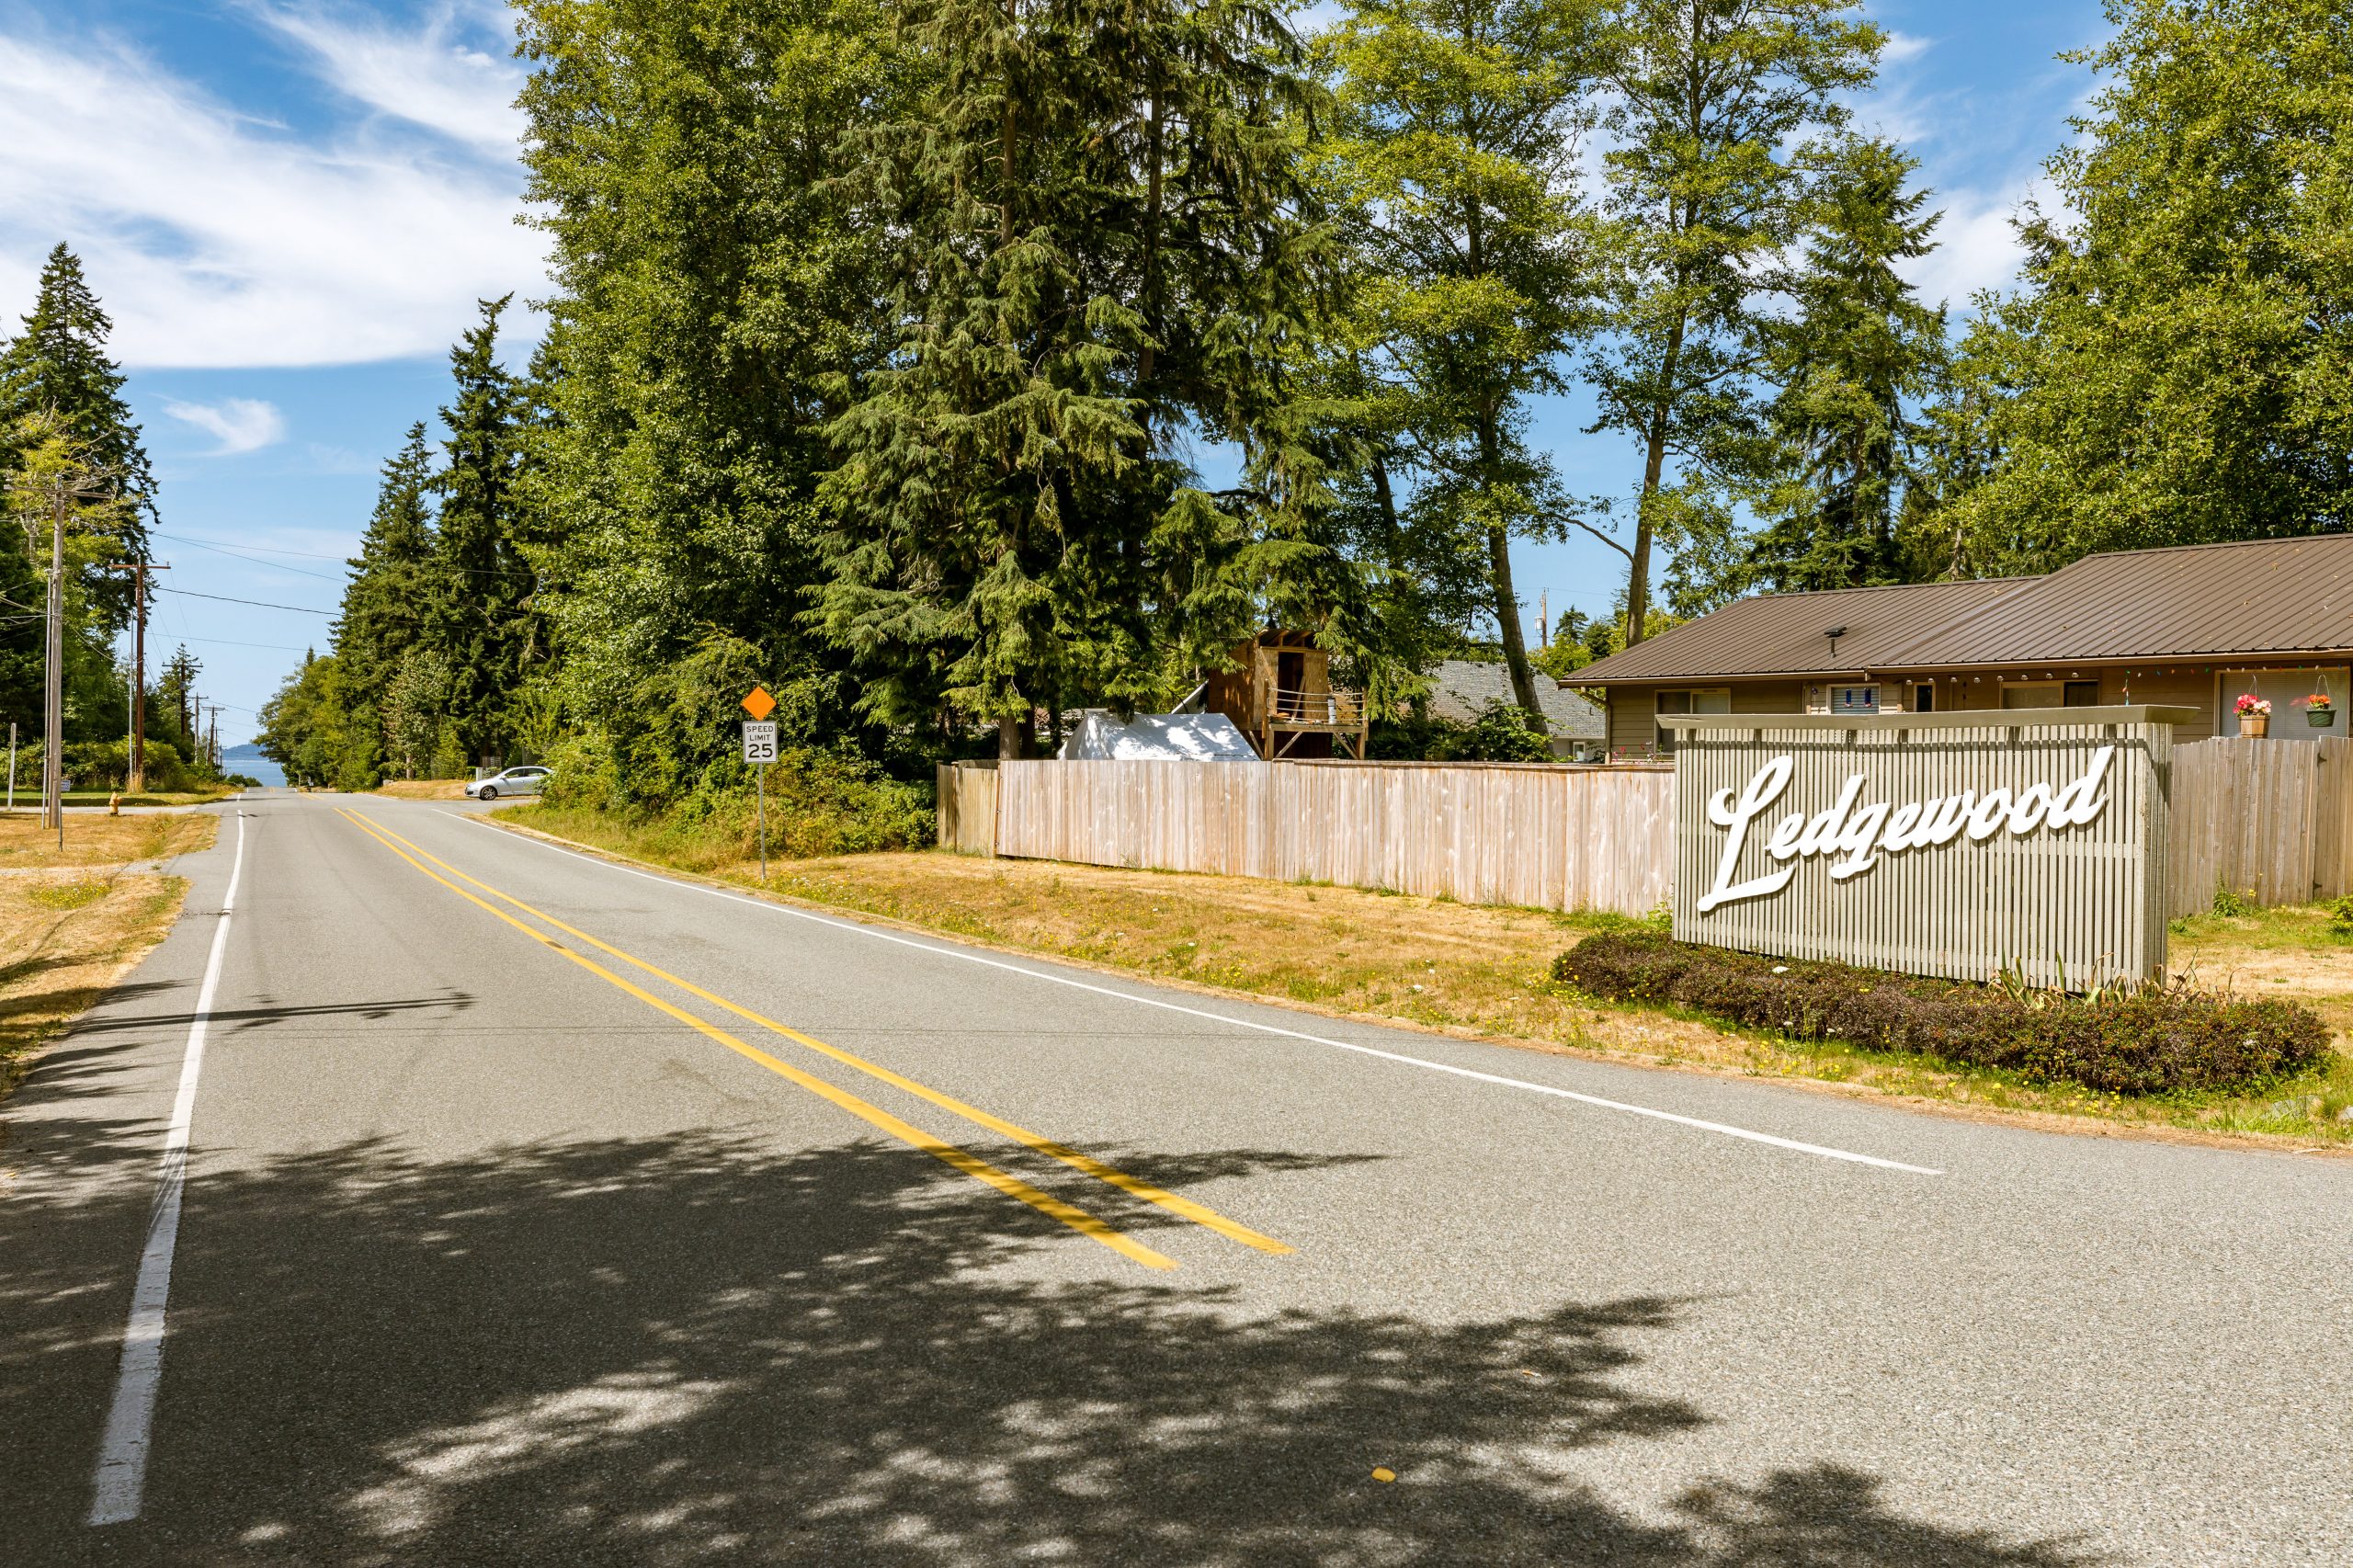 Ledgewood, Bon Air, Whidbey Island, Neighborhoods, Coupeville, Neighborhood, Love Where you live, waterfront, community, Windermere Whidbey Island, Island Life, Find your dream home. Whidbey Island South, Welcome to ledgewood, welcome to the neighborhood